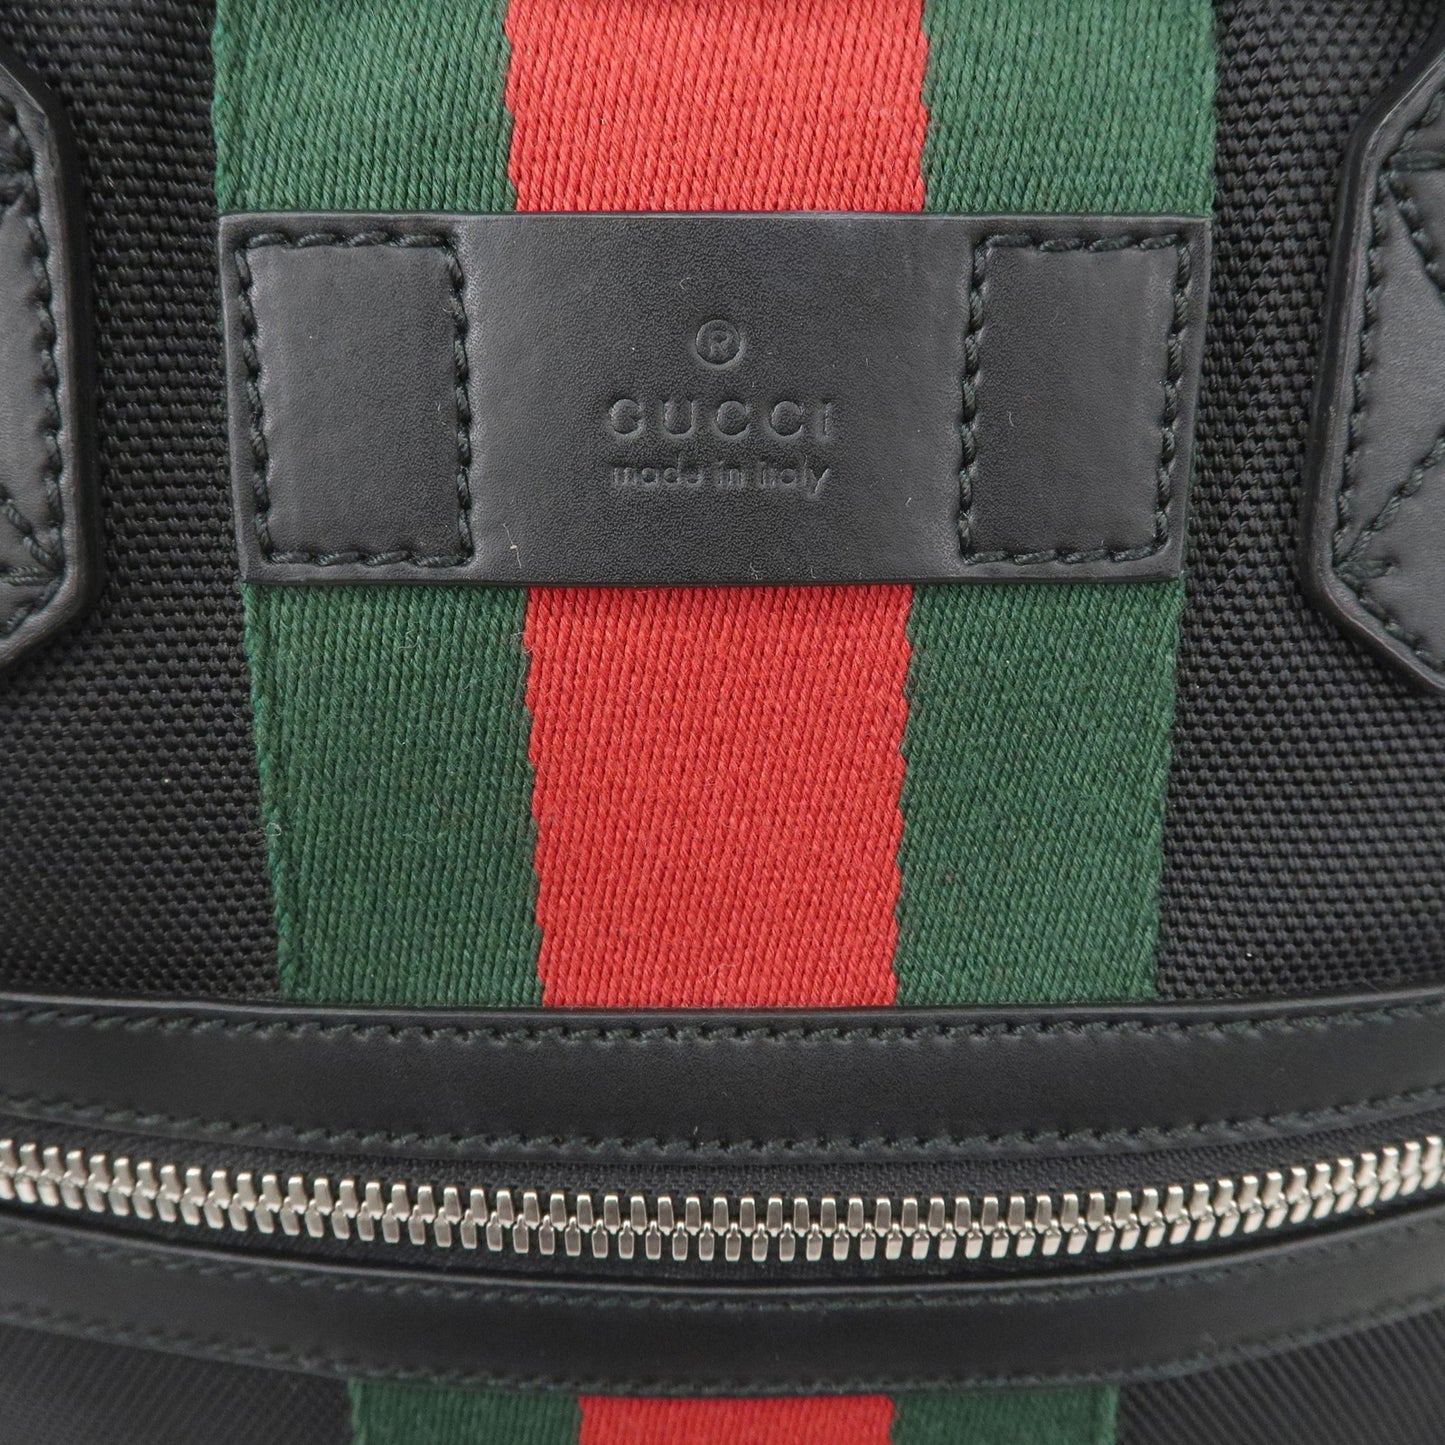 GUCCI Sherry GG Supreme Leather Back Pack Black 495558